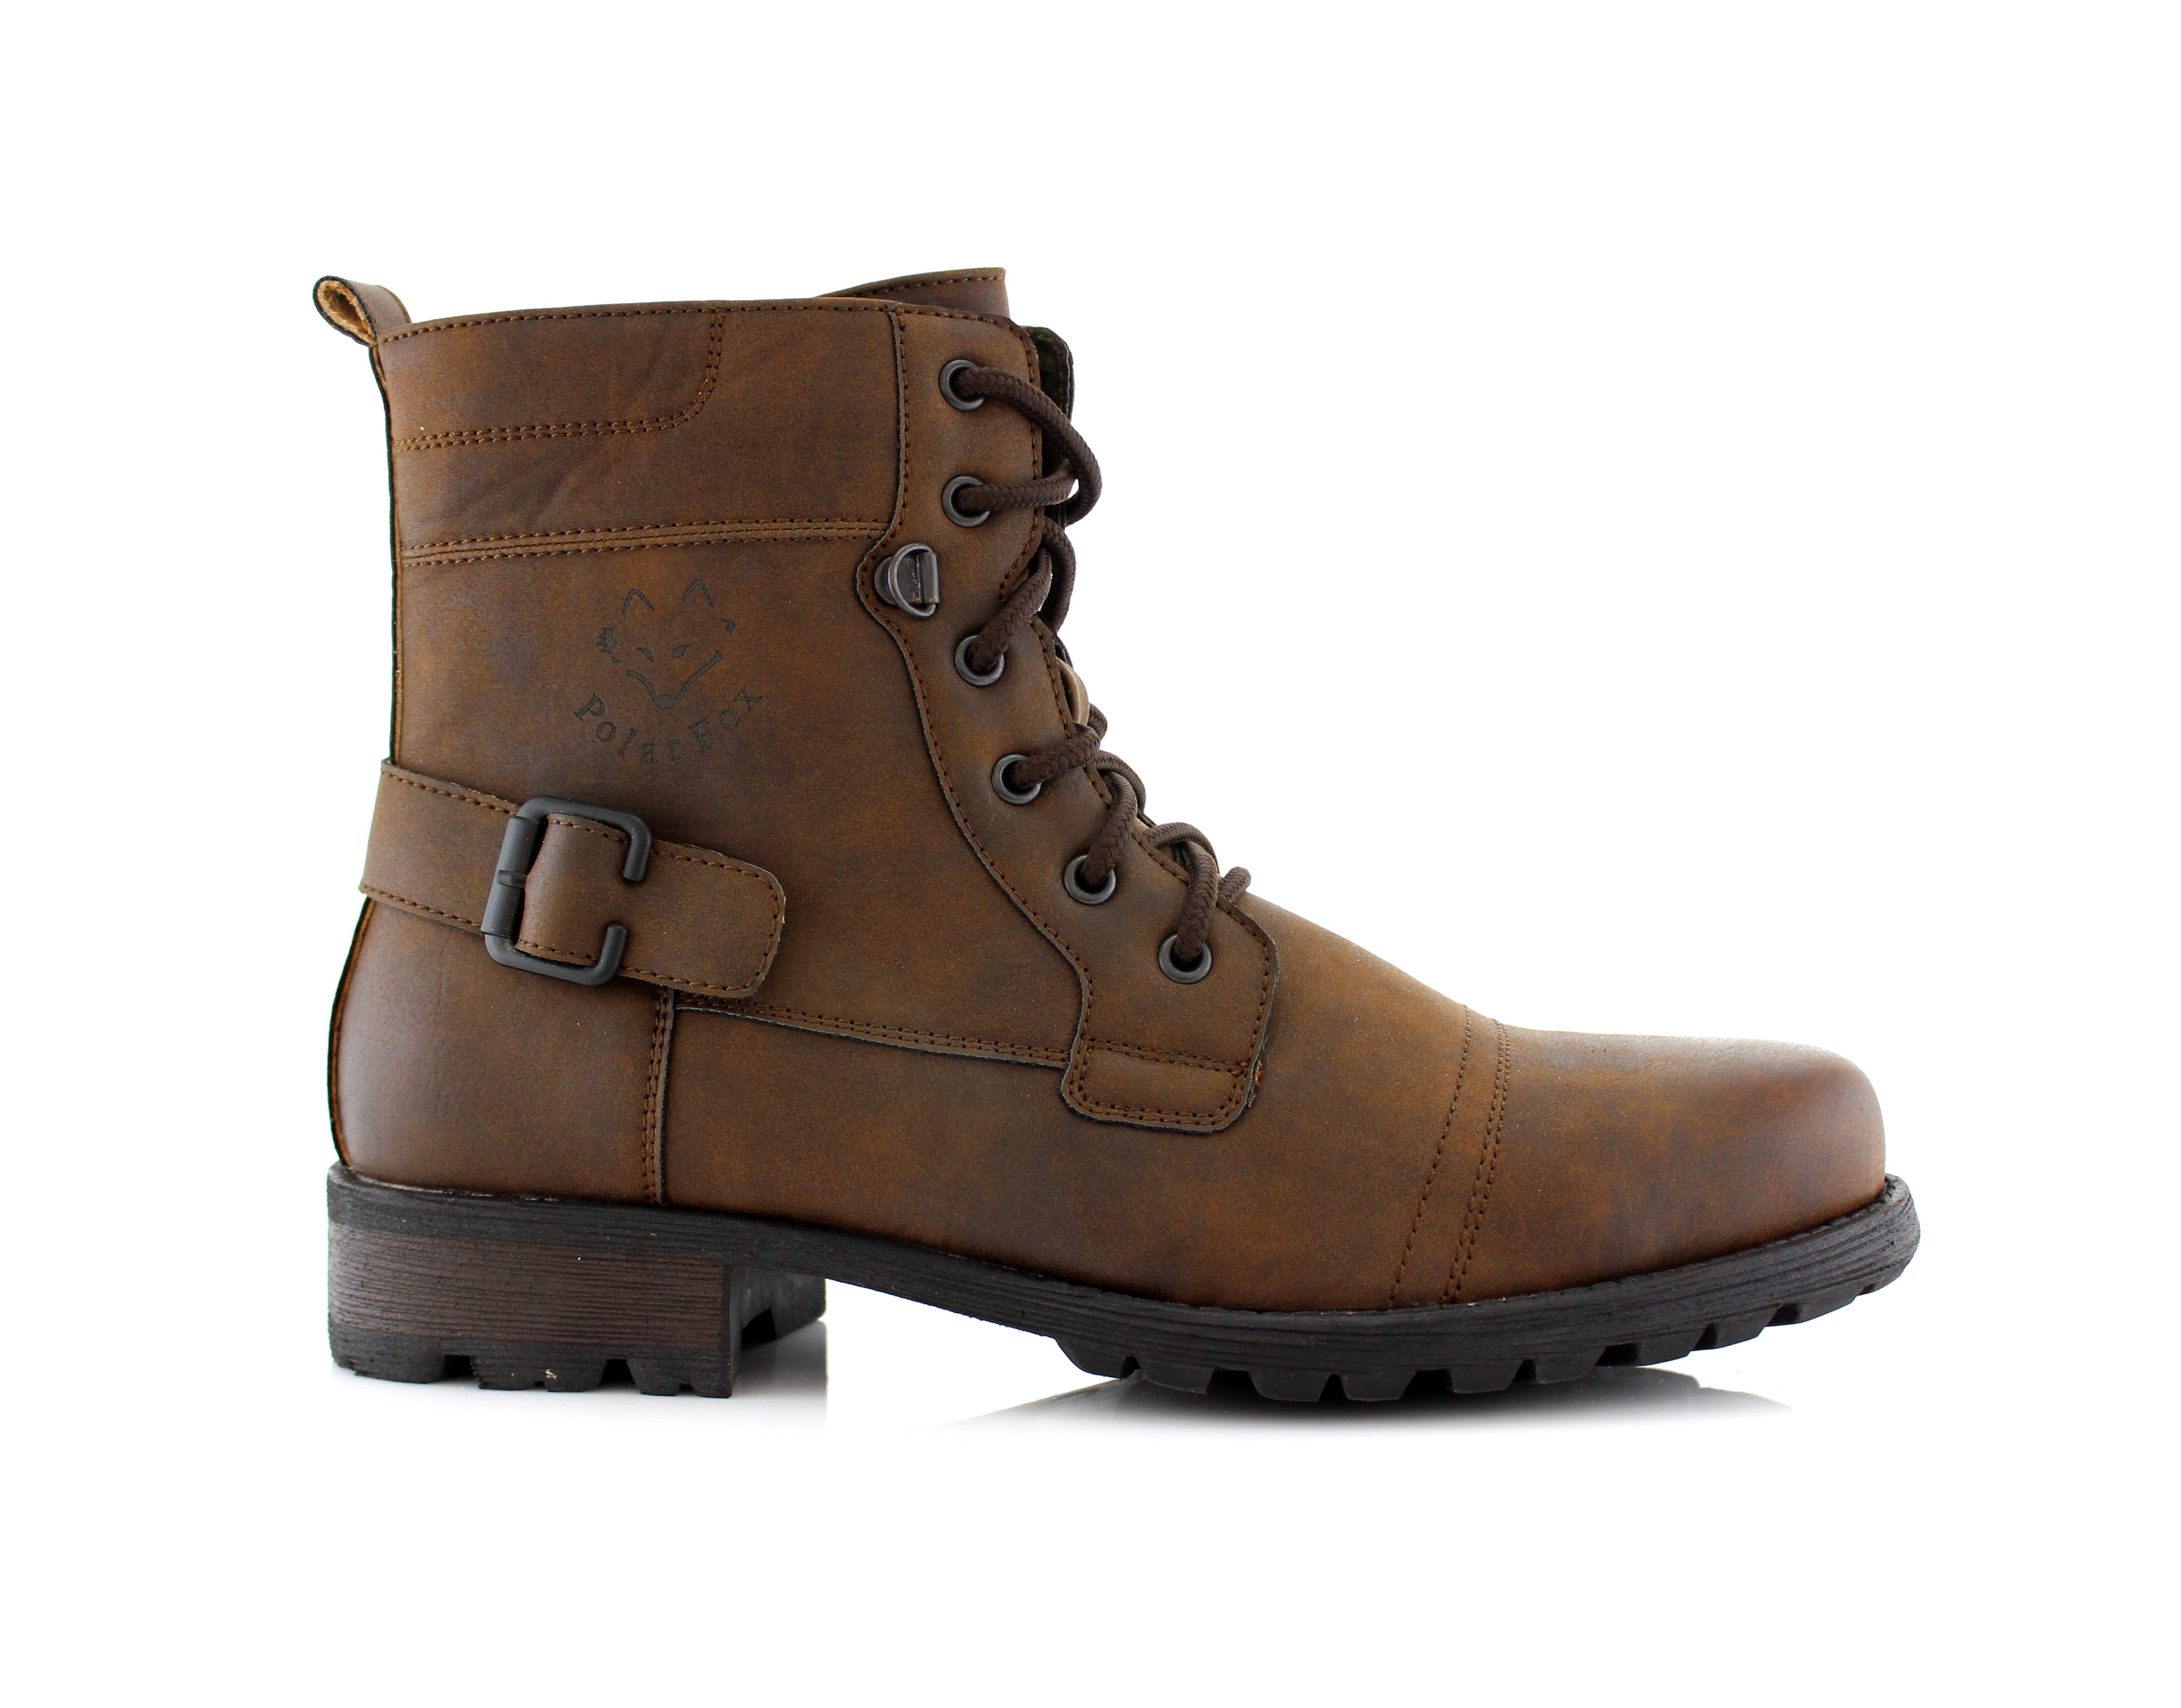 Rugged Inner Mesh Boots | Fabian by Polar Fox | Conal Footwear | Outer Side Angle View